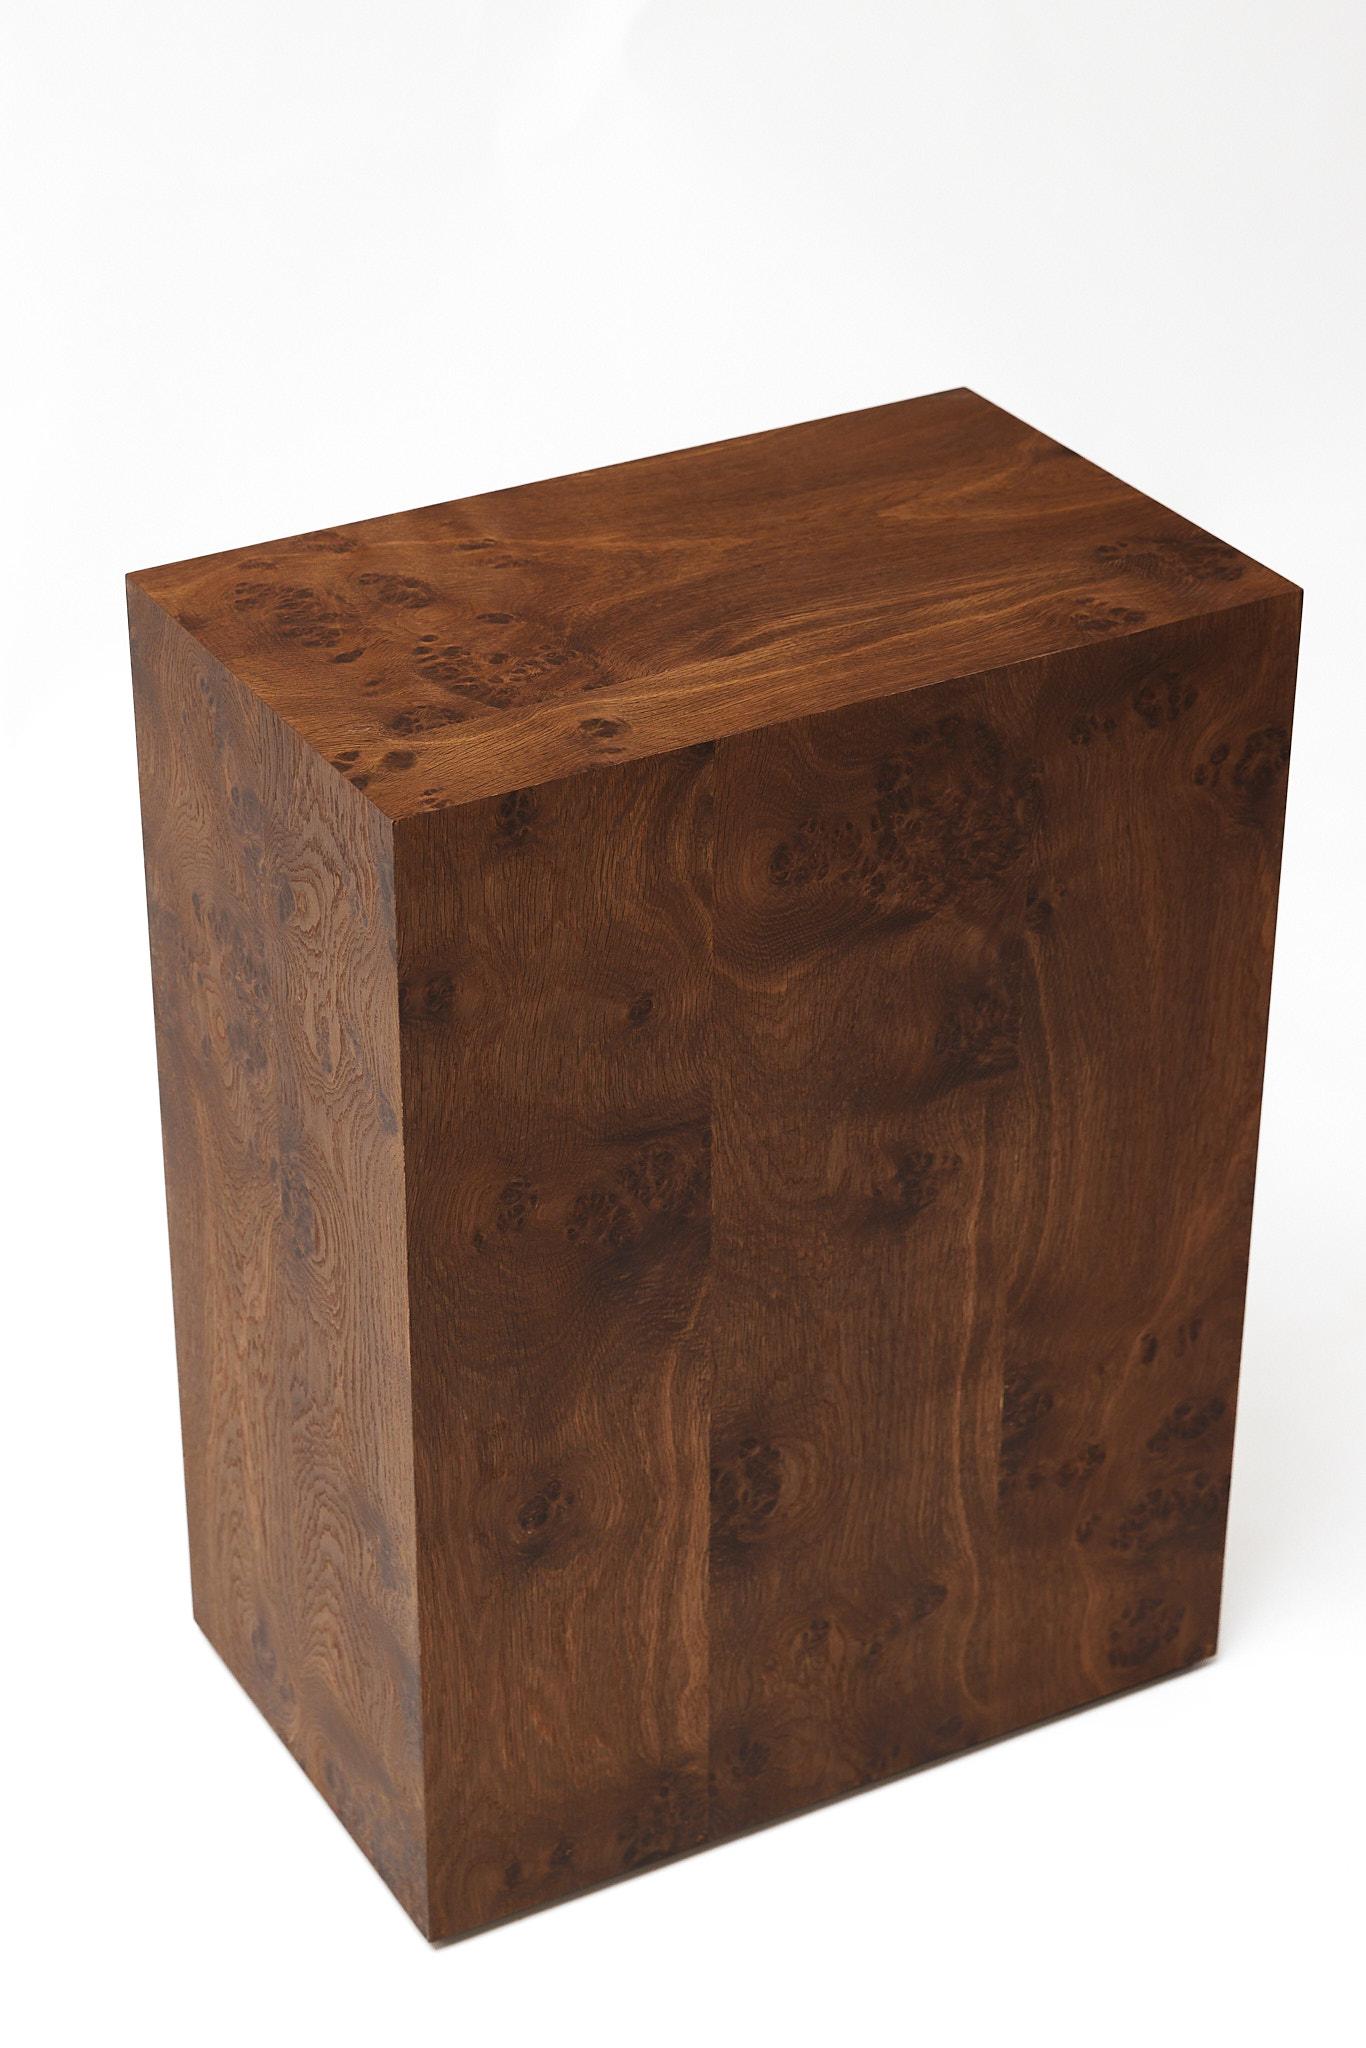 Pedestal stand, covered in smoked oak veneer.
Note that the pedestal has minor production faults where wood putty has been applied. Hence the price is almost 50% lower than the standard price. The pedestal can be ordered in bespoke measurements.